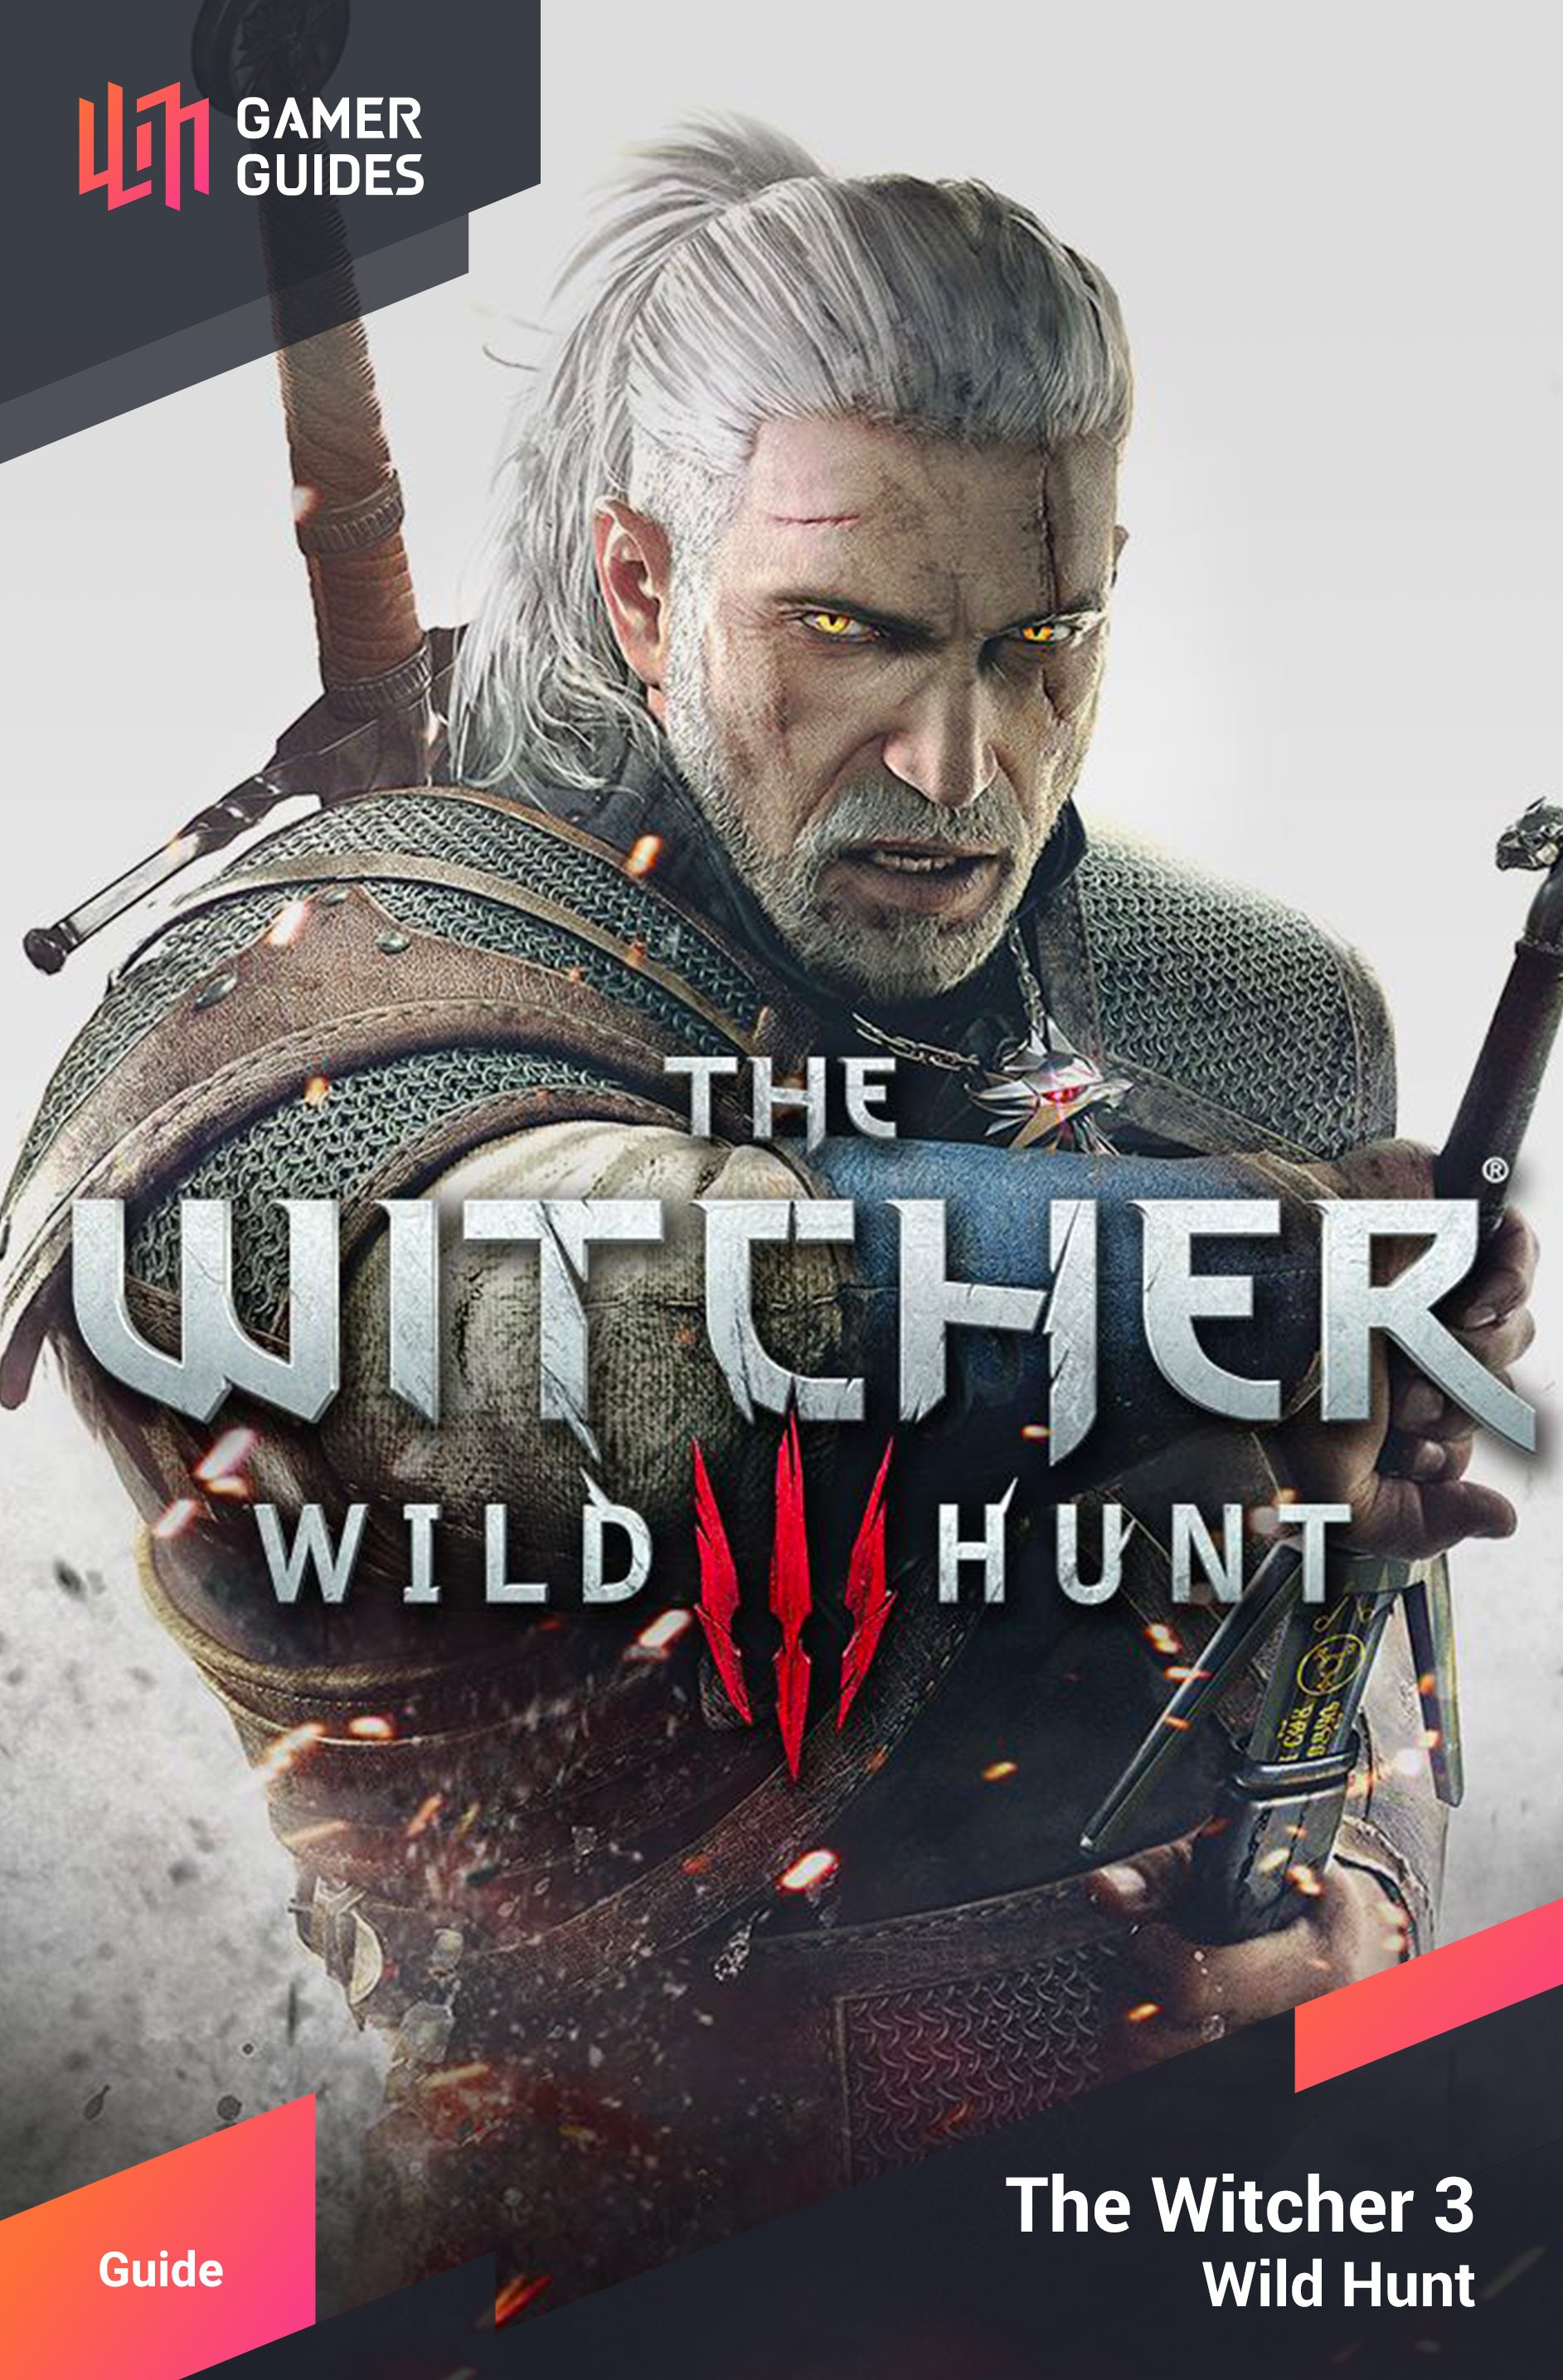 The Witcher 3 Wild Hunt Gamer Guides